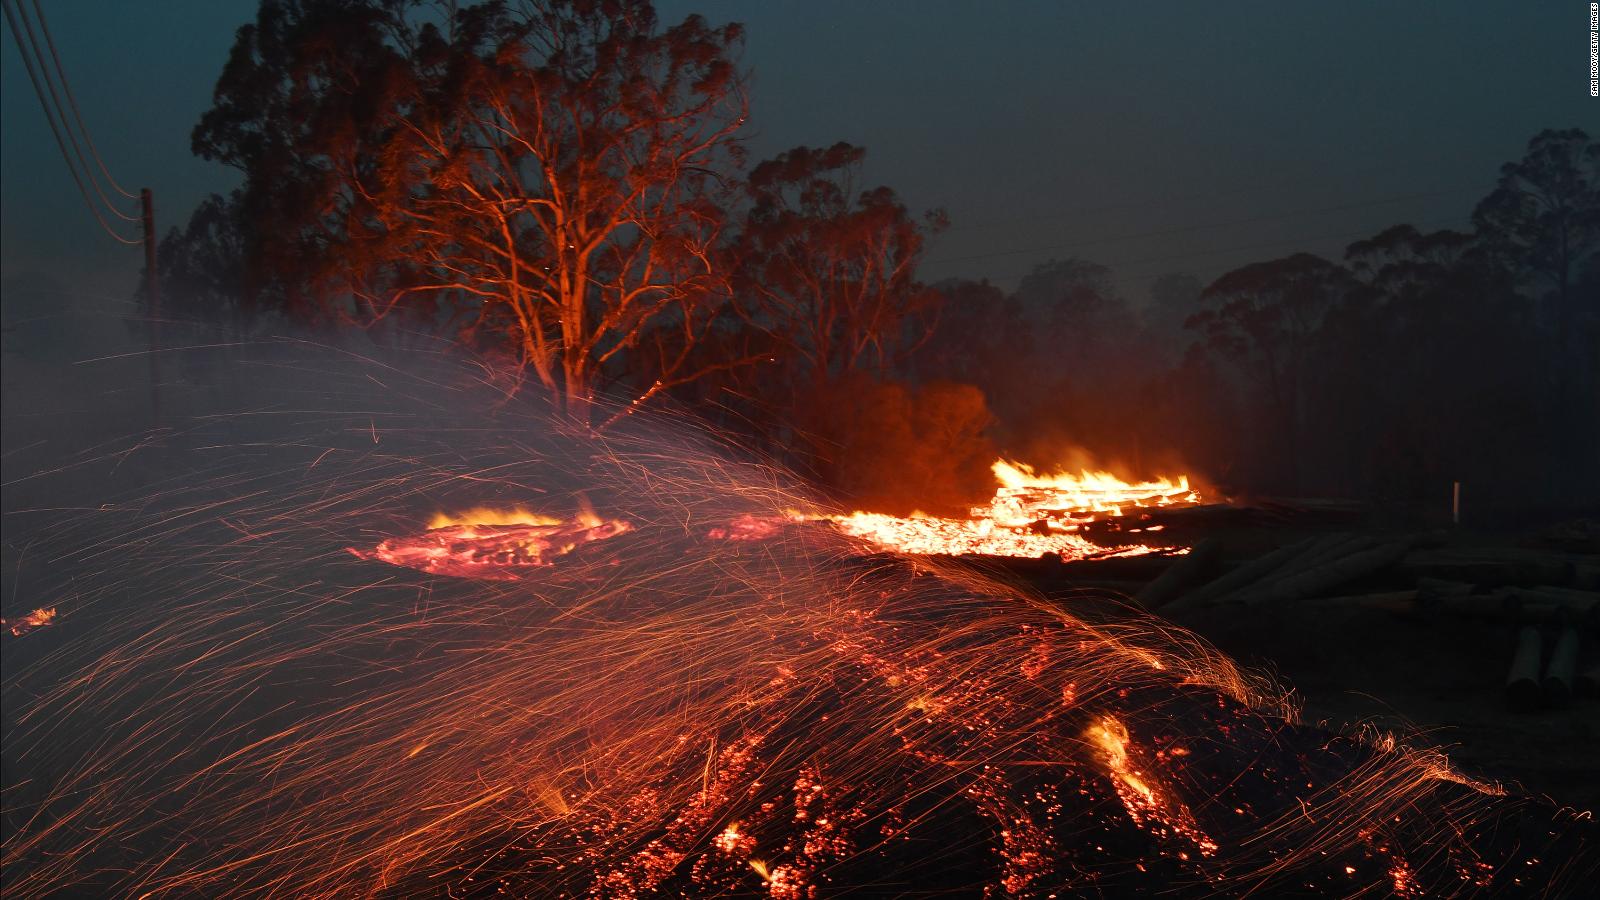 Australia's wildfires released as much smoke as a massive volcanic